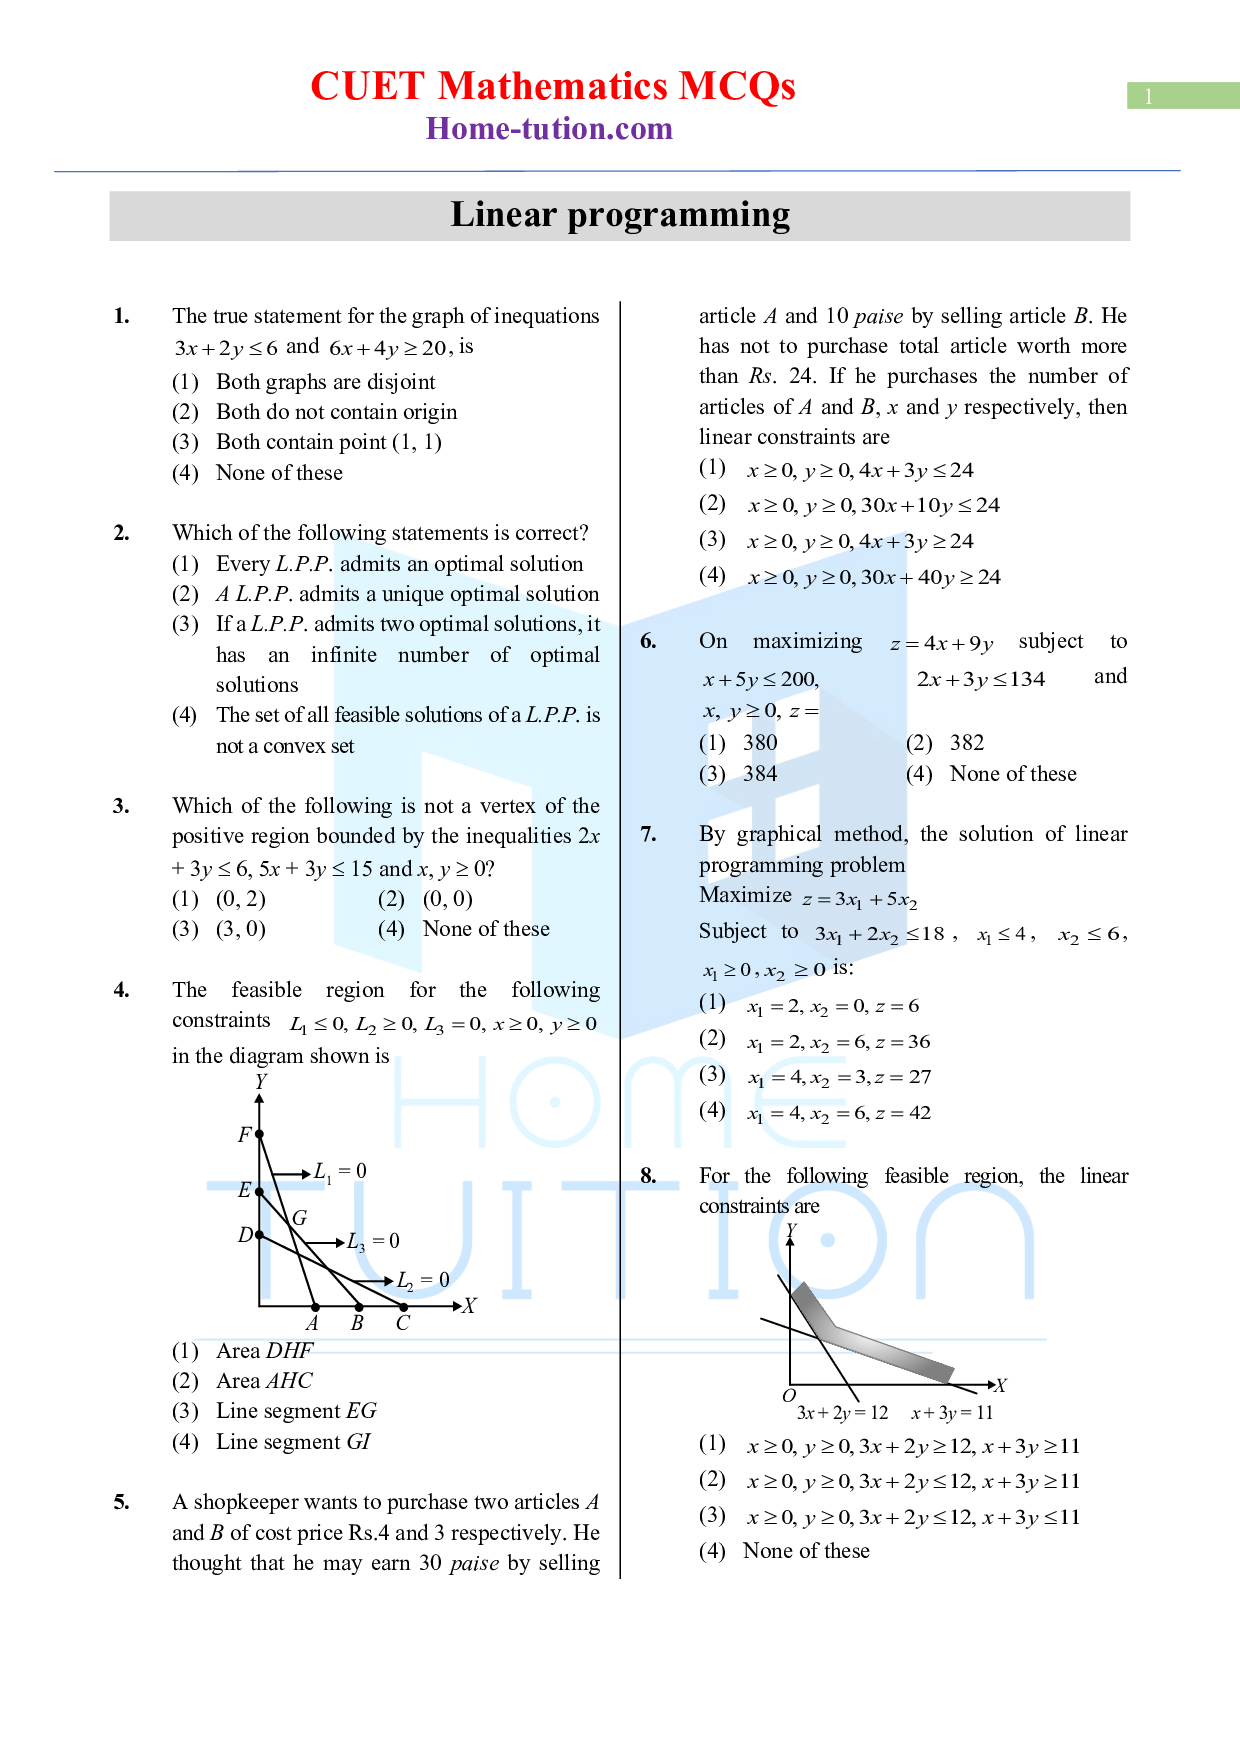 CUET MCQ Questions For Maths Chapter-9 Linear programming